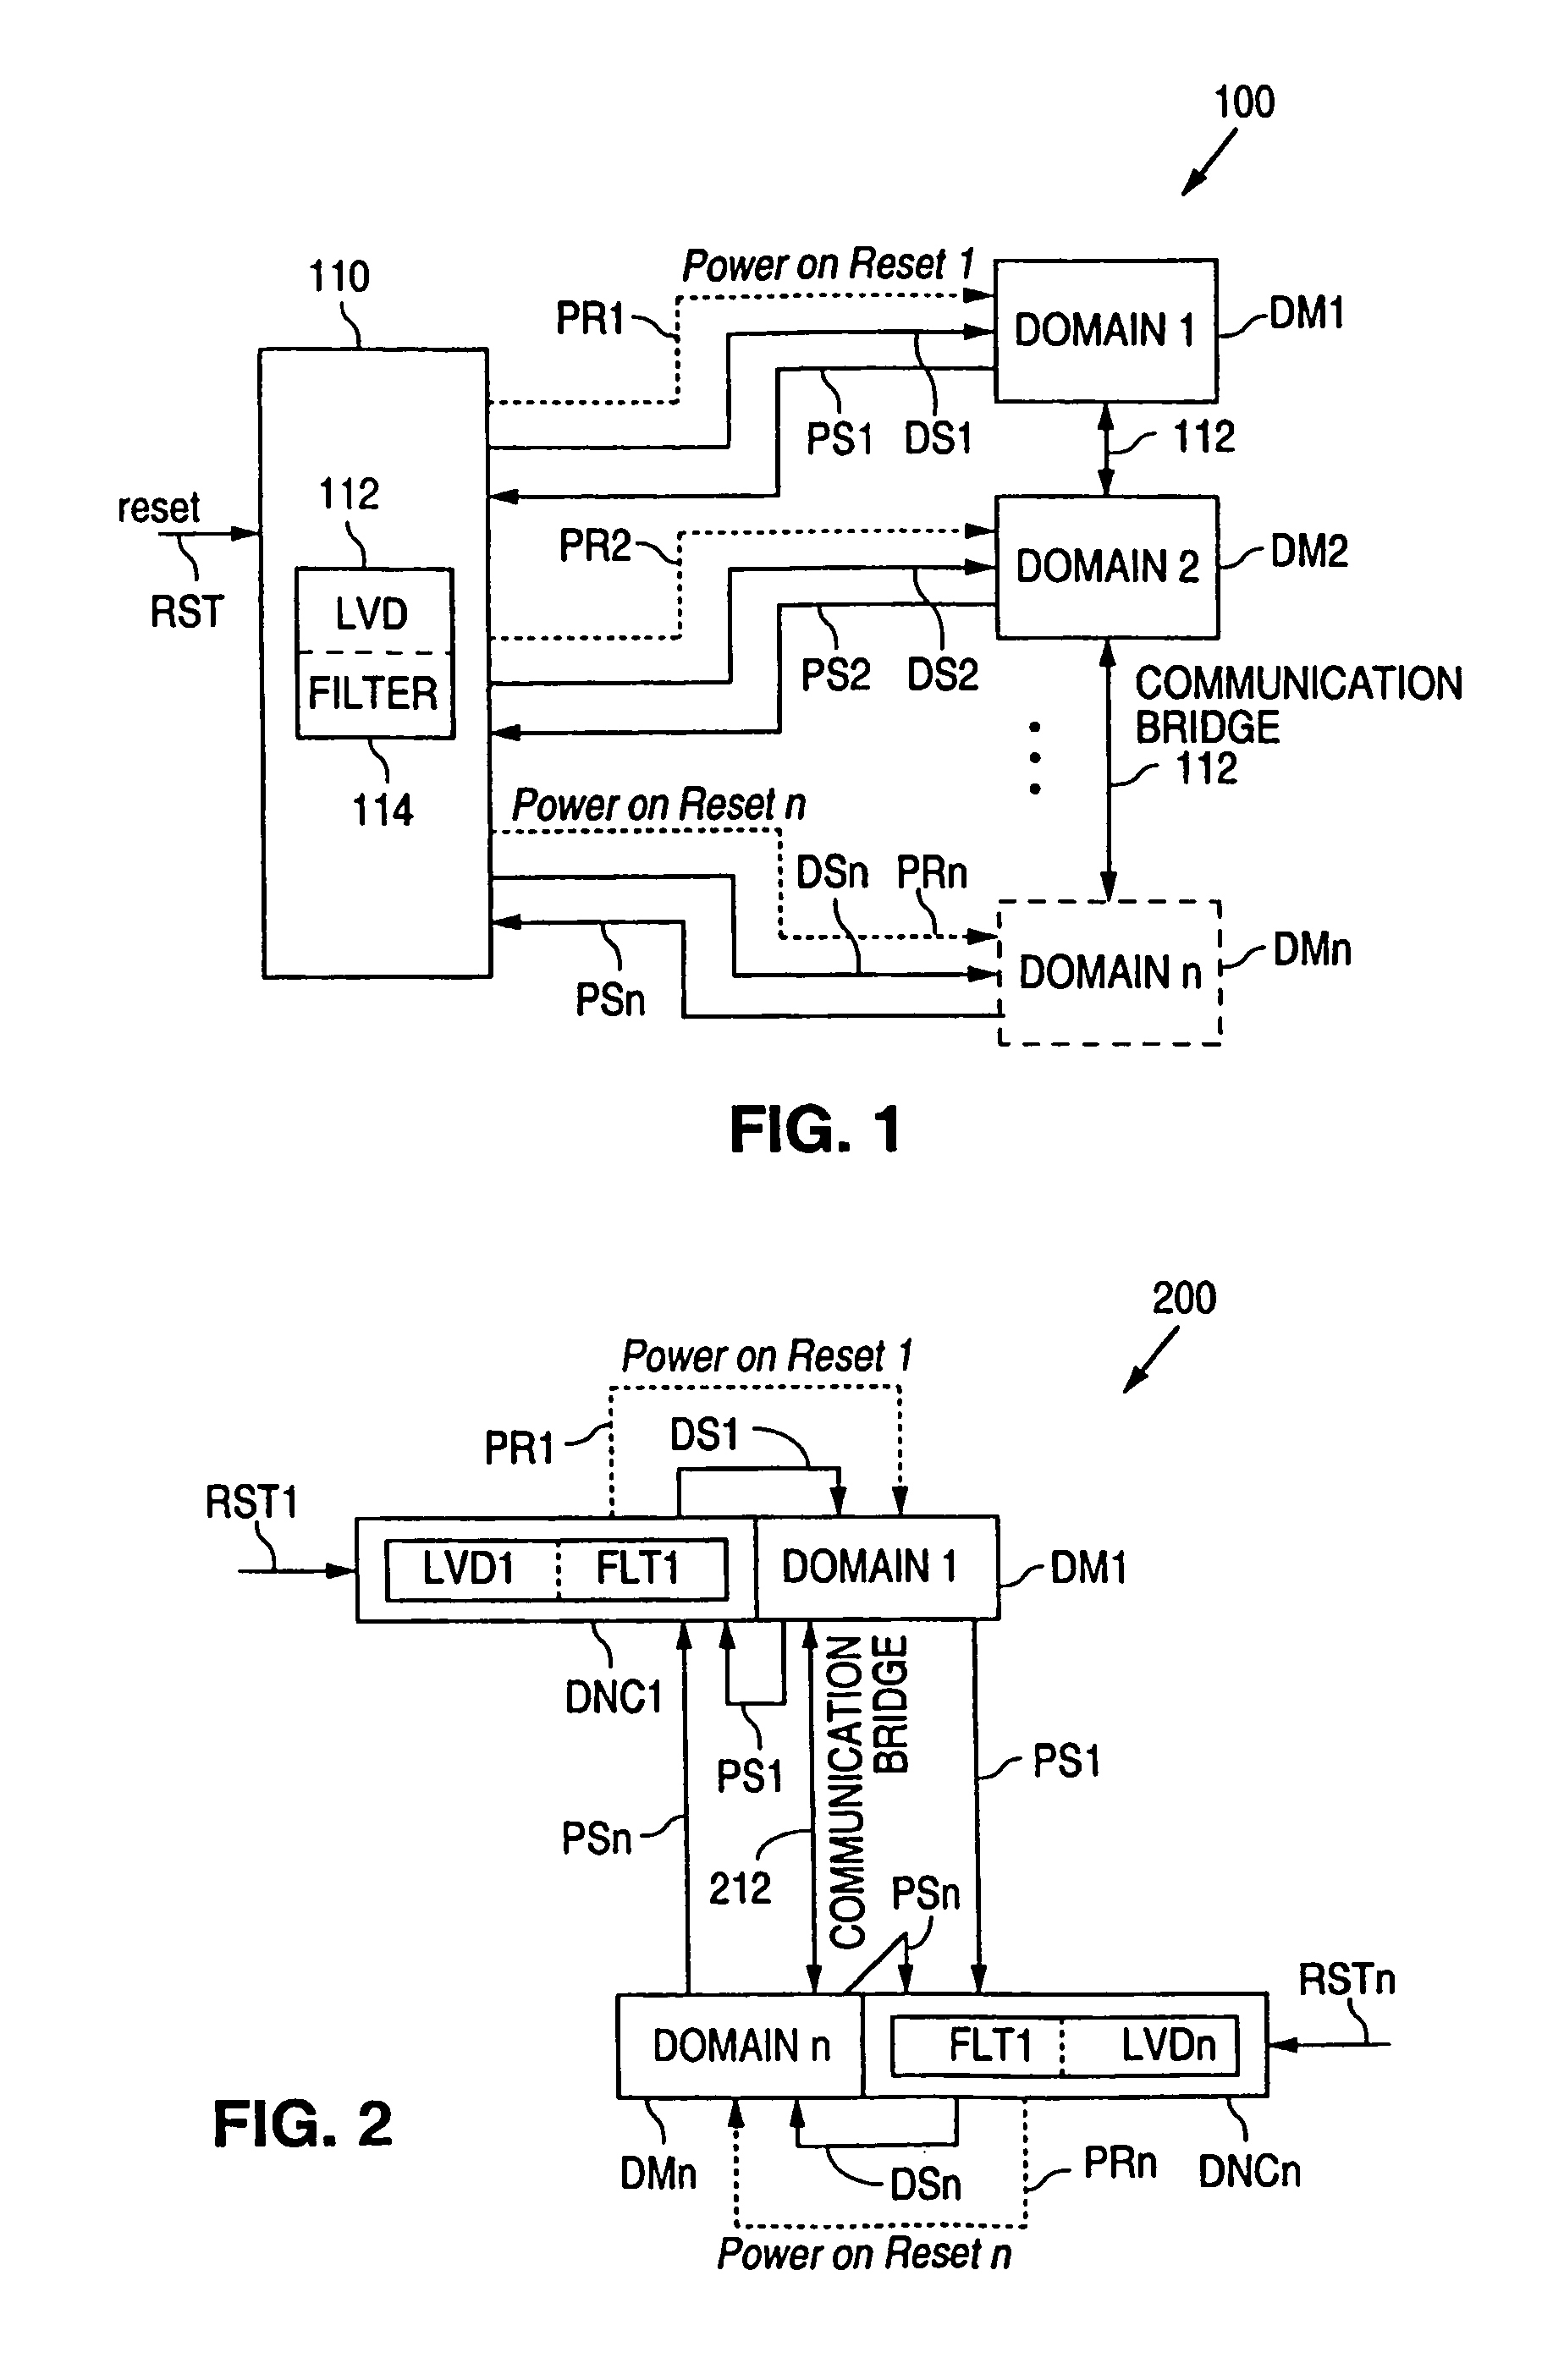 System and method for domain power monitoring and notification